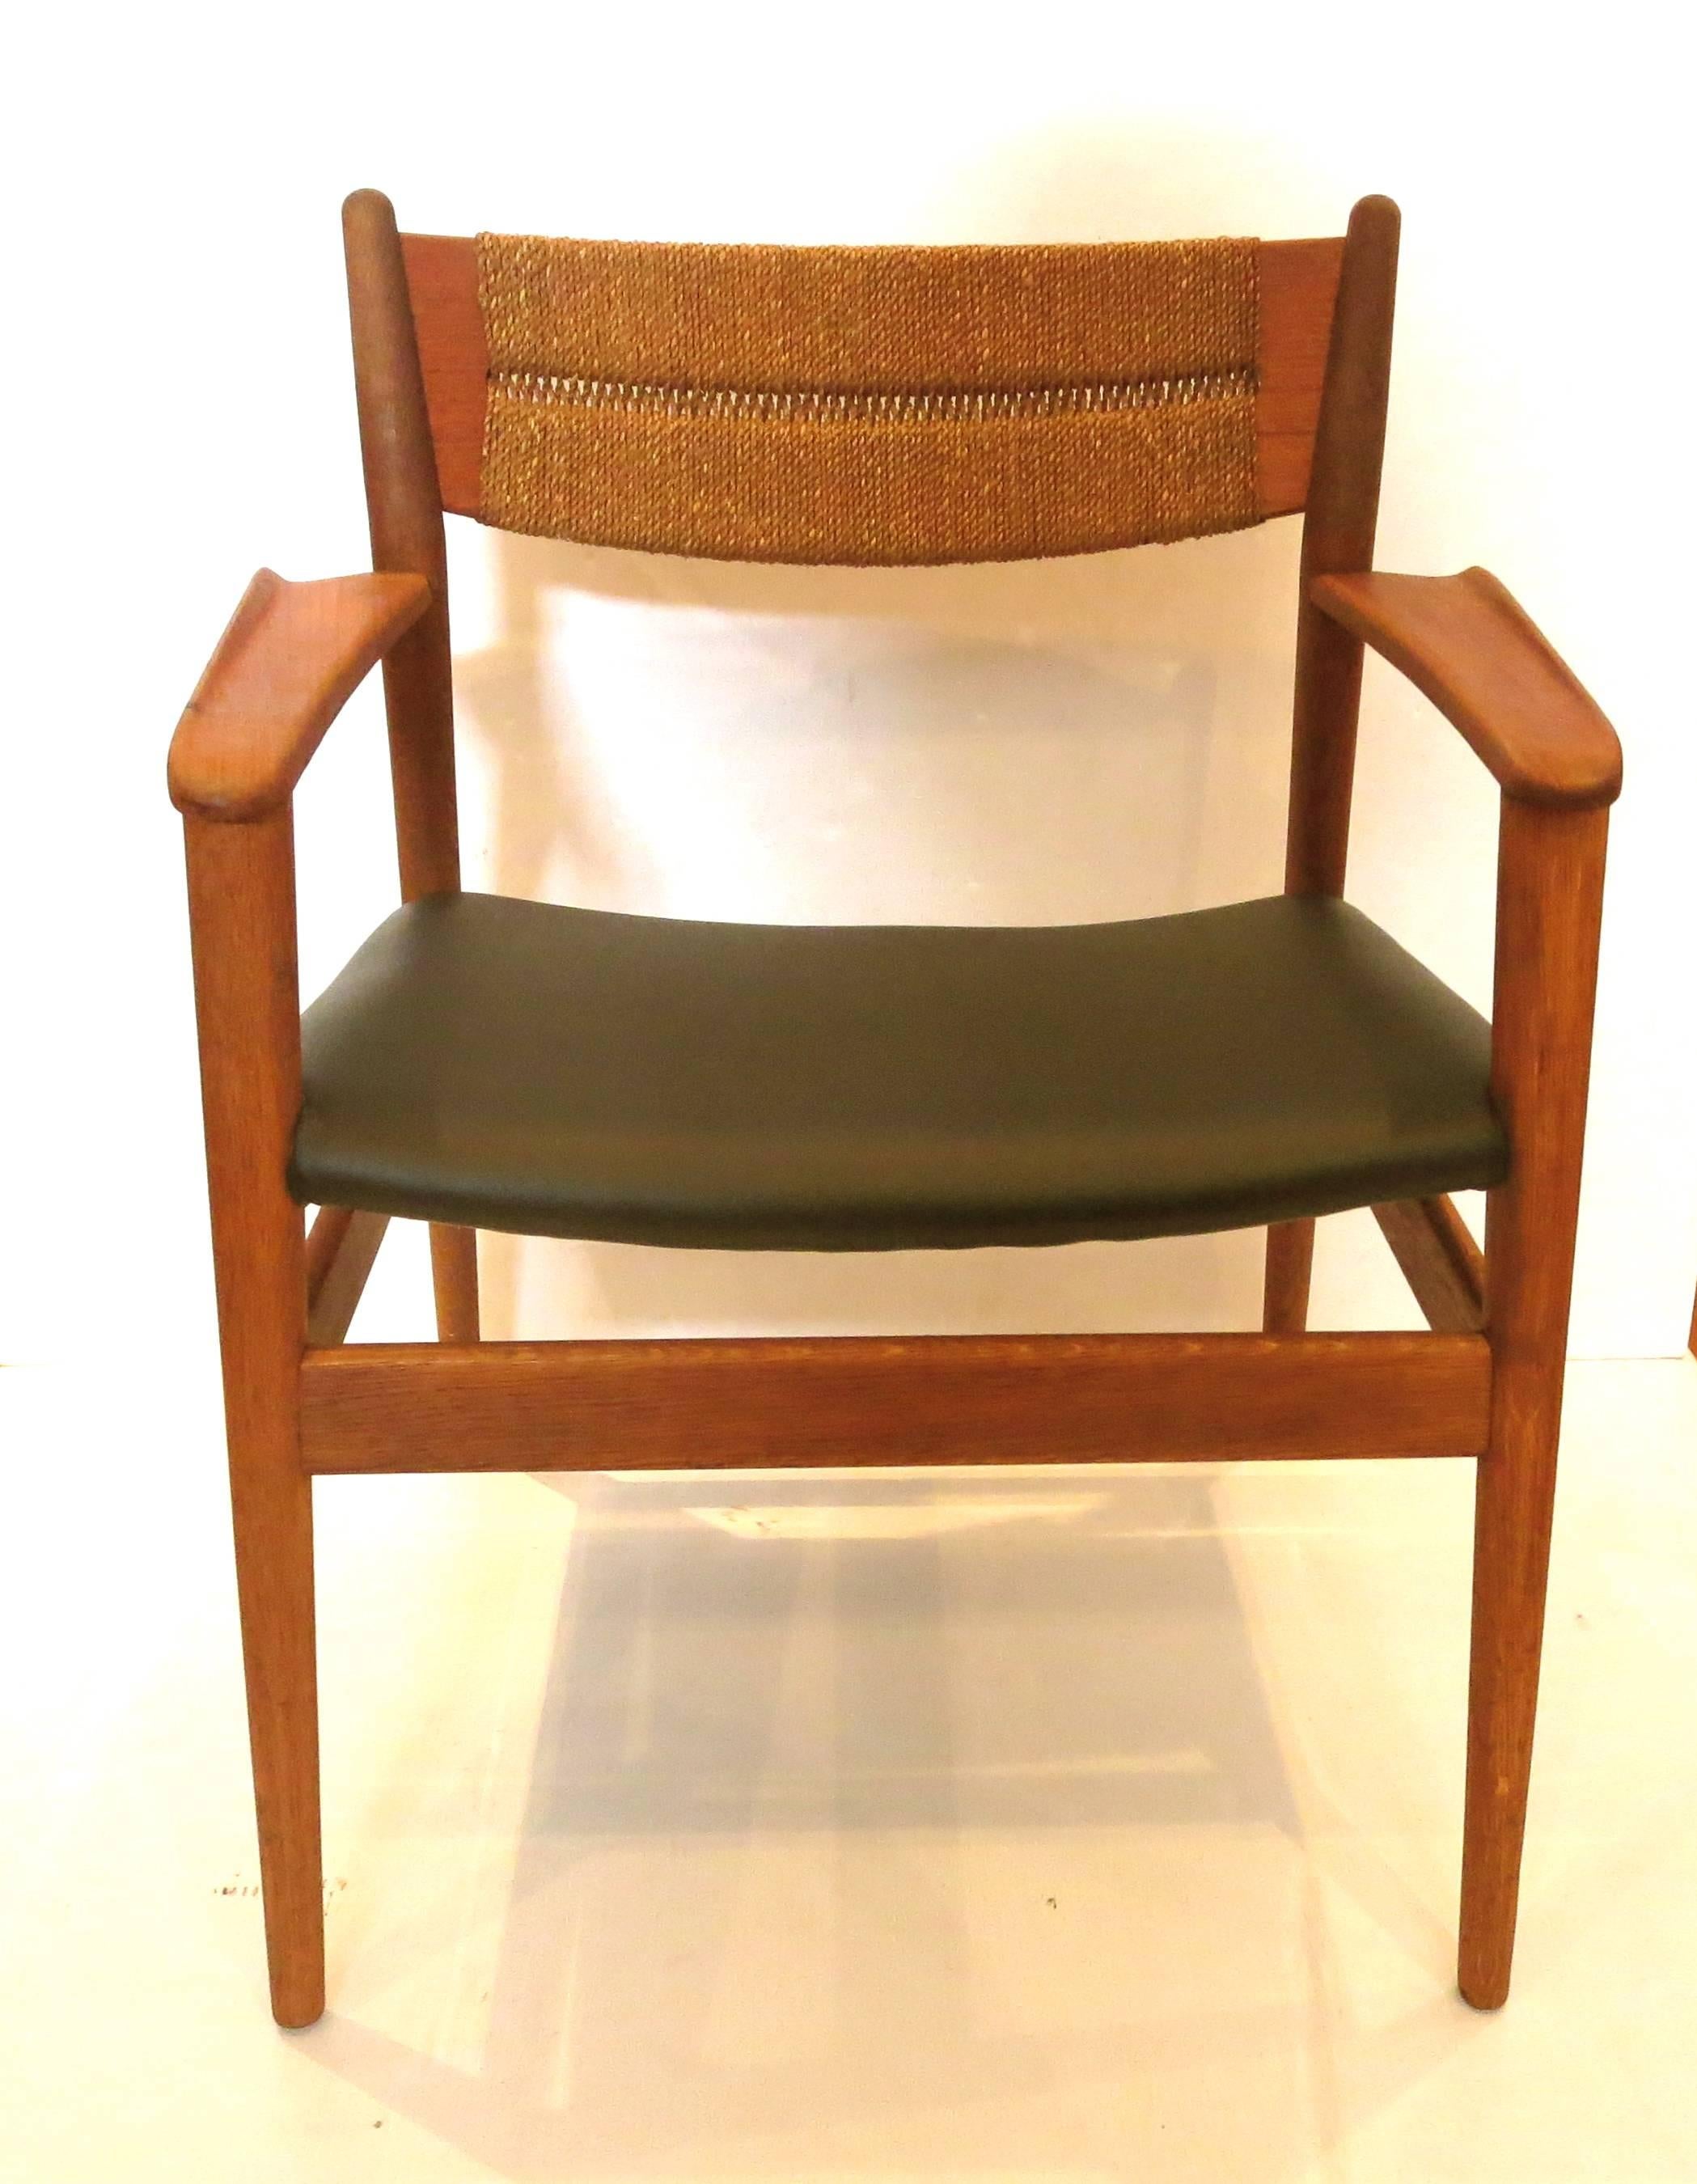 Rare pair of captain chairs, designed by Arne Vodder, circa 1950s solid oak frame with sculpted teak arms, seagrass backing and freshly recover in black Naugahyde, we restore them and they are solid and sturdy a very rare and great design chair by a